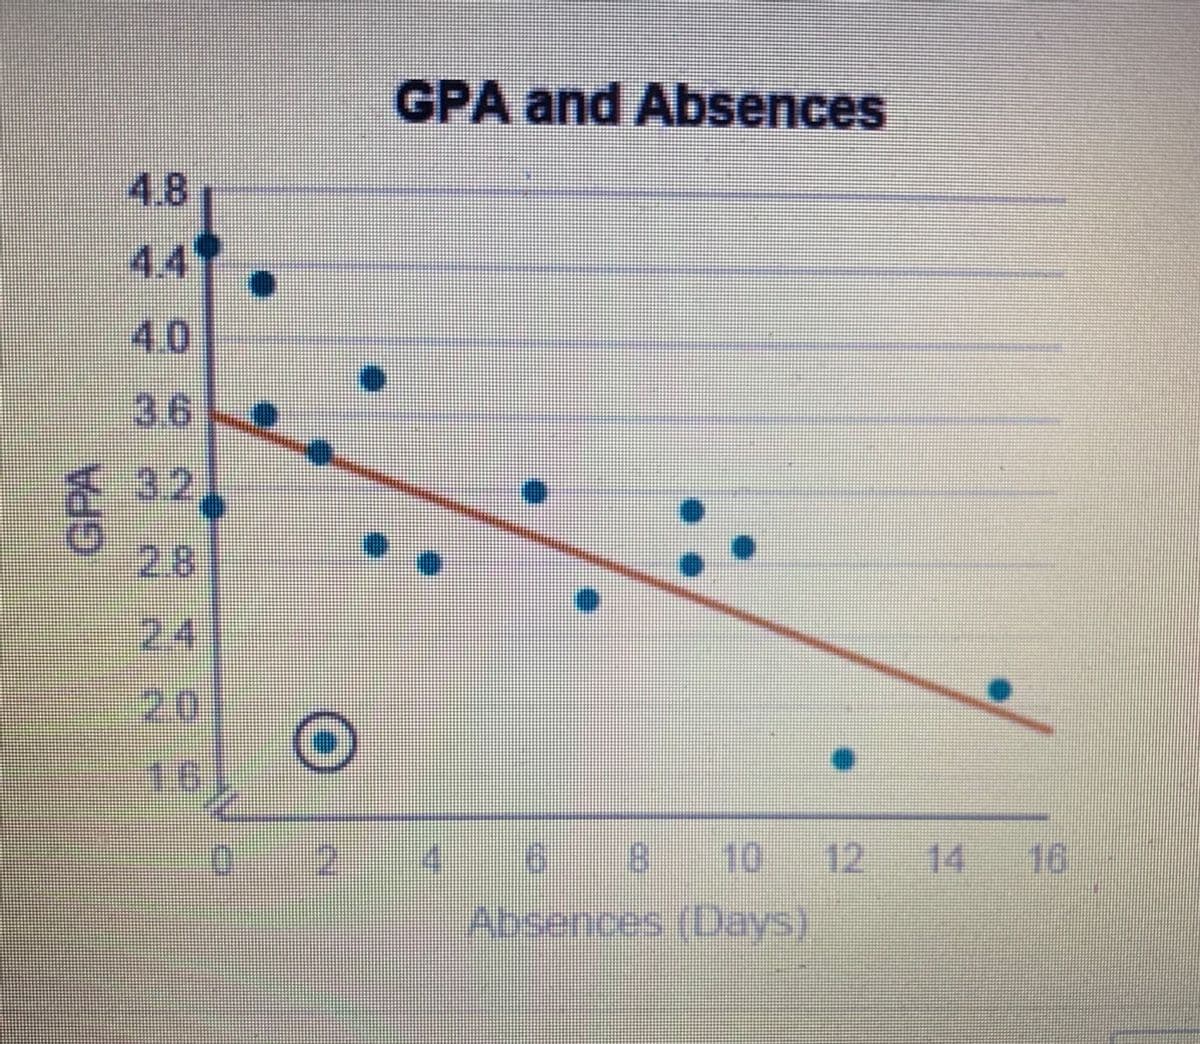 GPA and Absences
4.8
44
4.0
36
各3.2
2.8
24
20
16
4.
10
12 14
16
Absences (Days)
